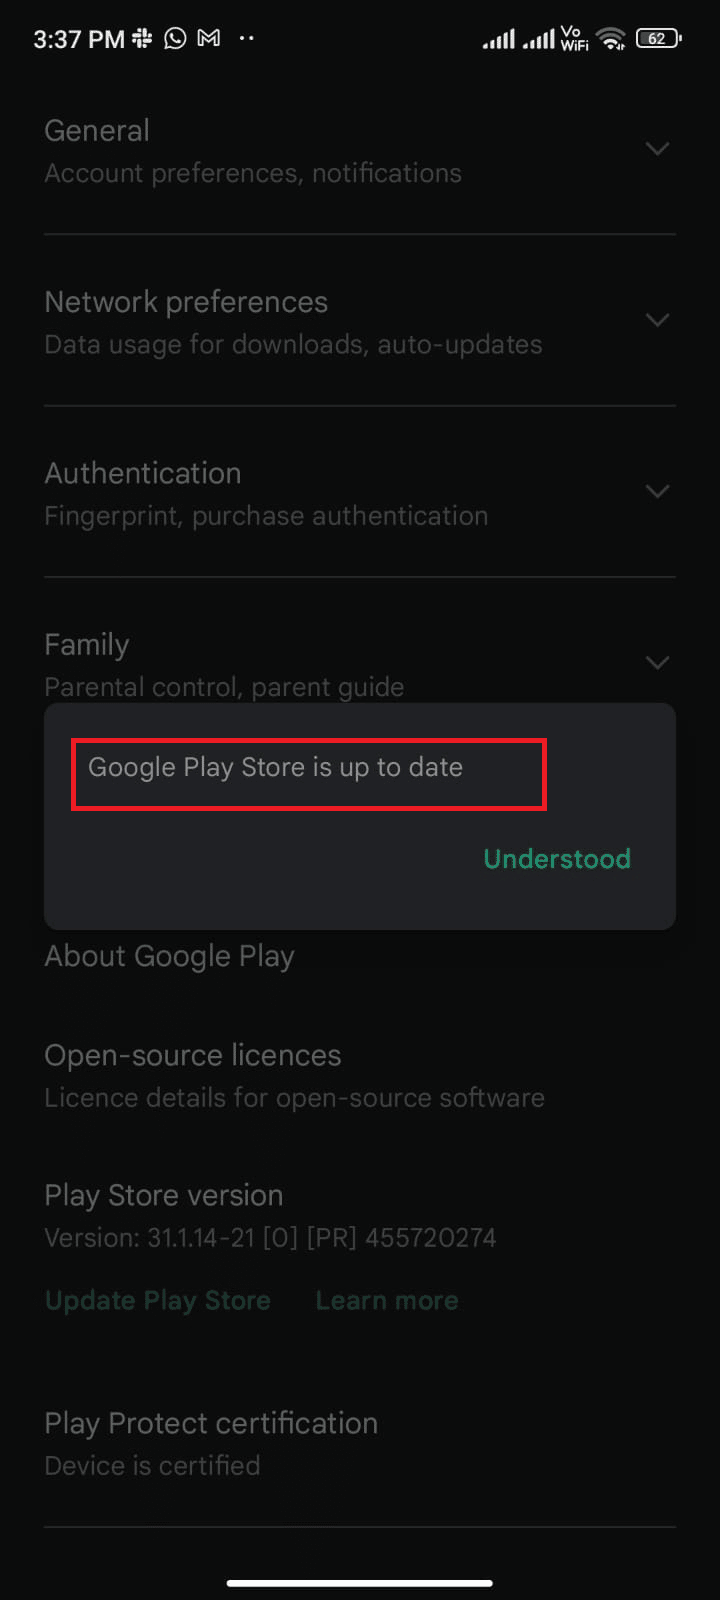 you will be prompted with Google Play Store is up to date